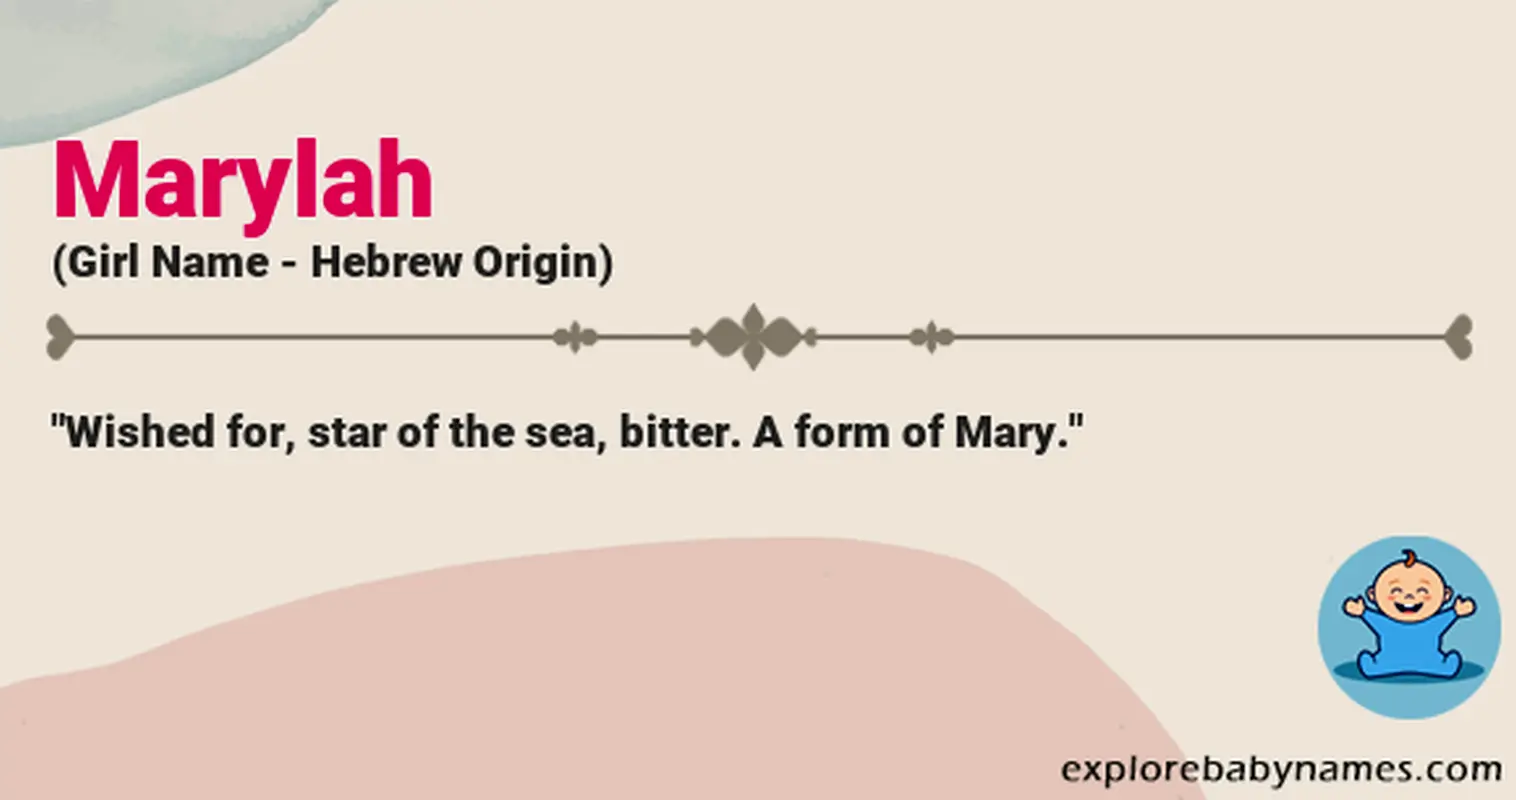 Meaning of Marylah